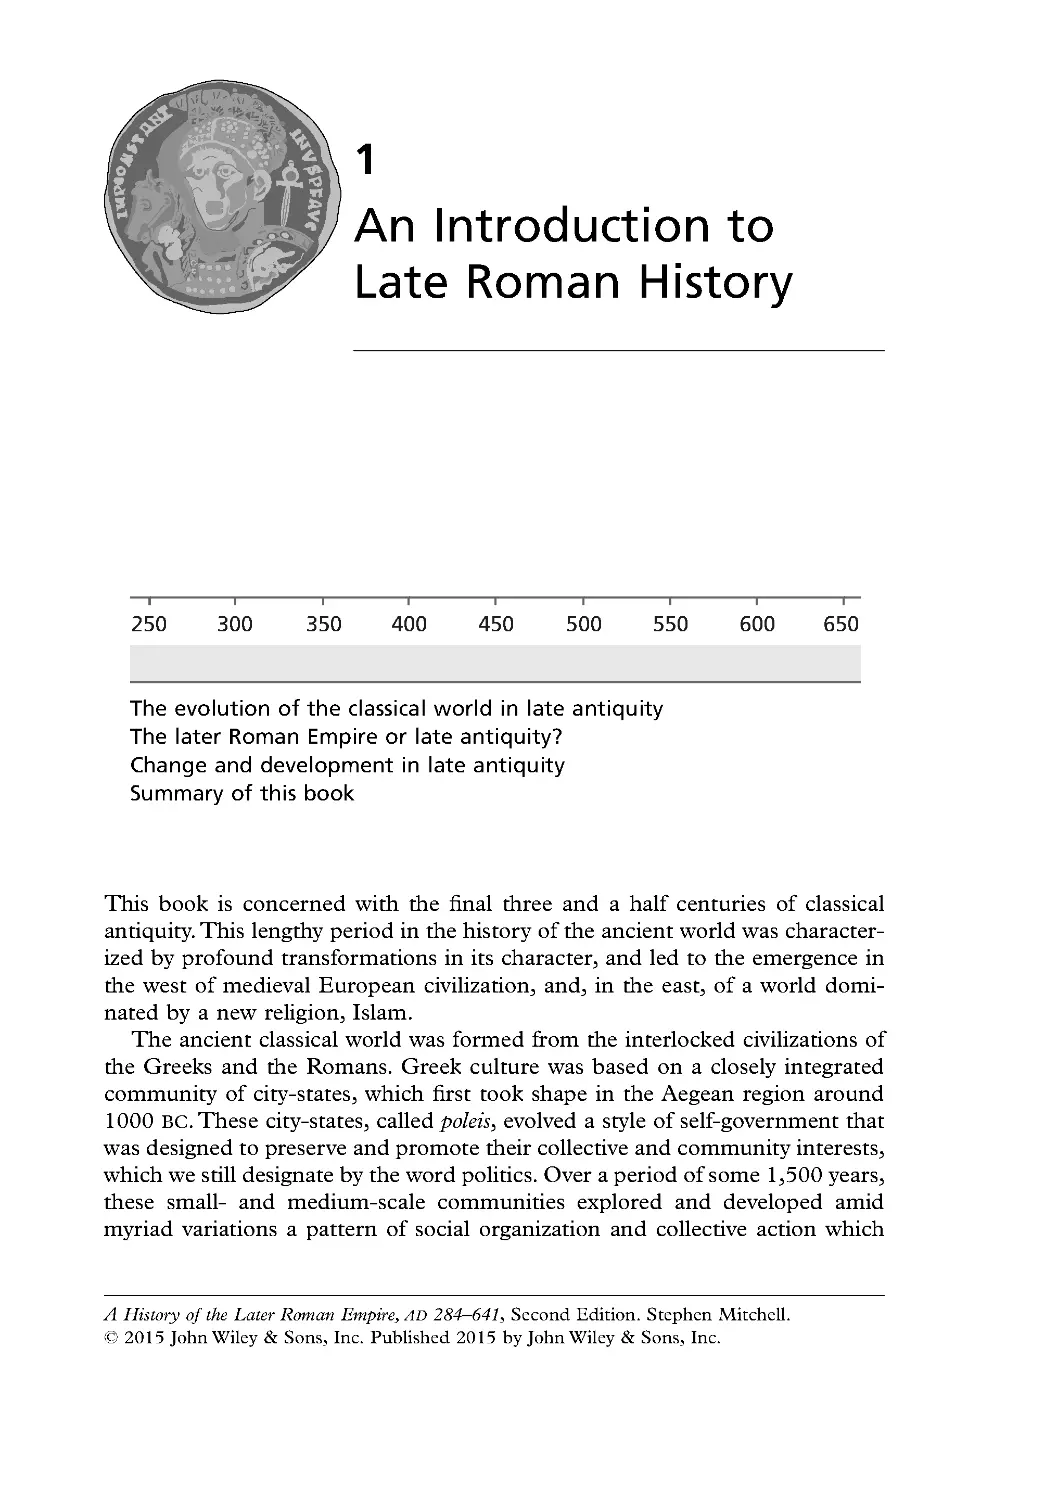 1: An Introduction to Late Roman History